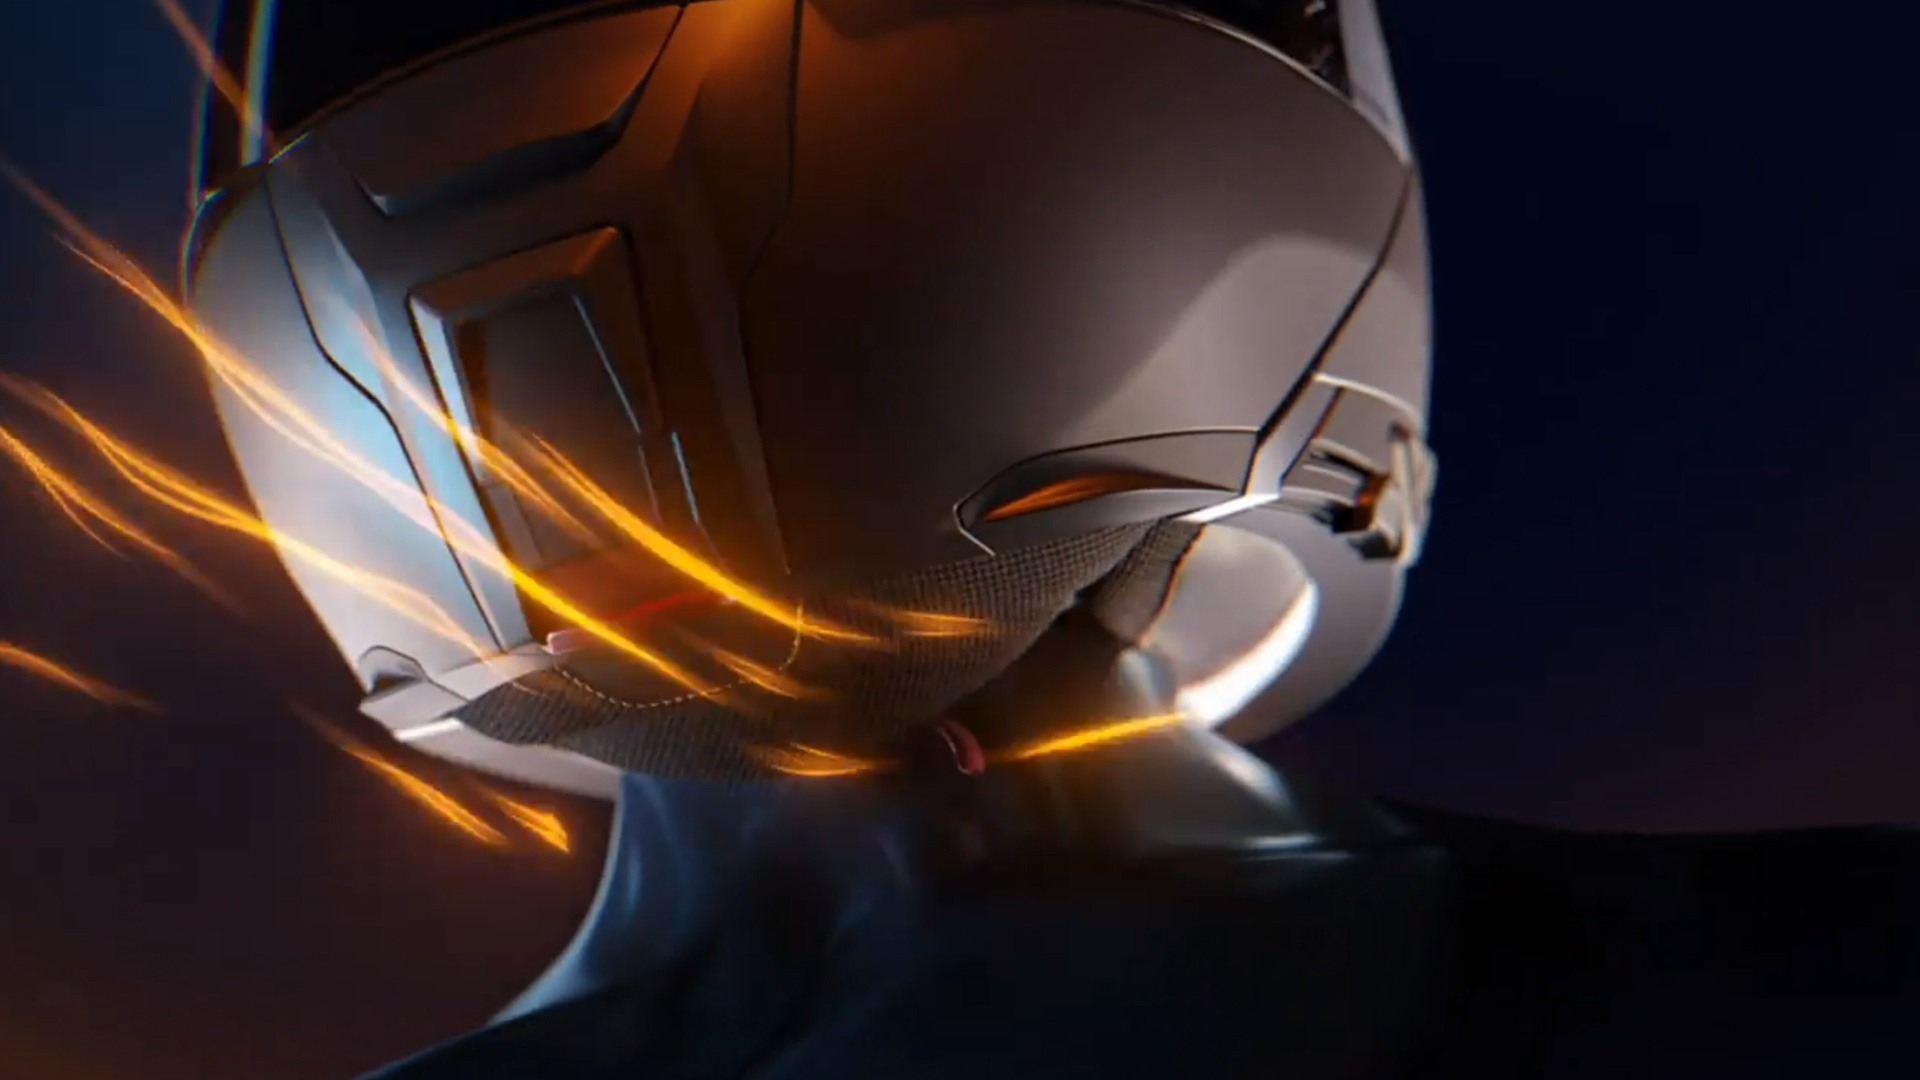 SCHUBERTH C5 Carbon  Episode 3 : The Game Changer - the Formula 1